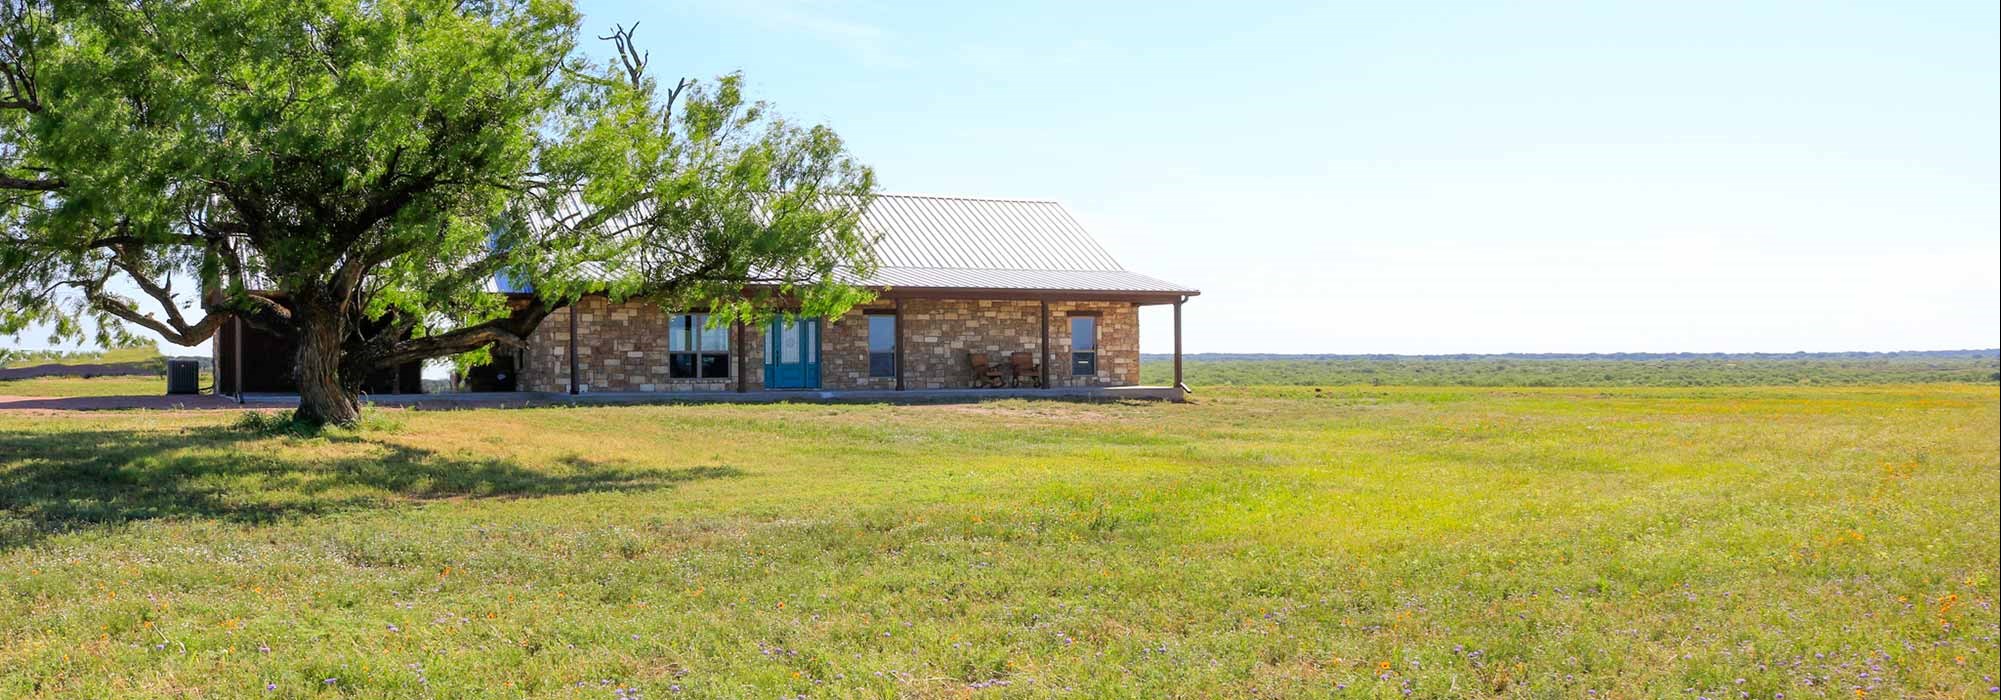 Rural & Country Home Loans in Texas